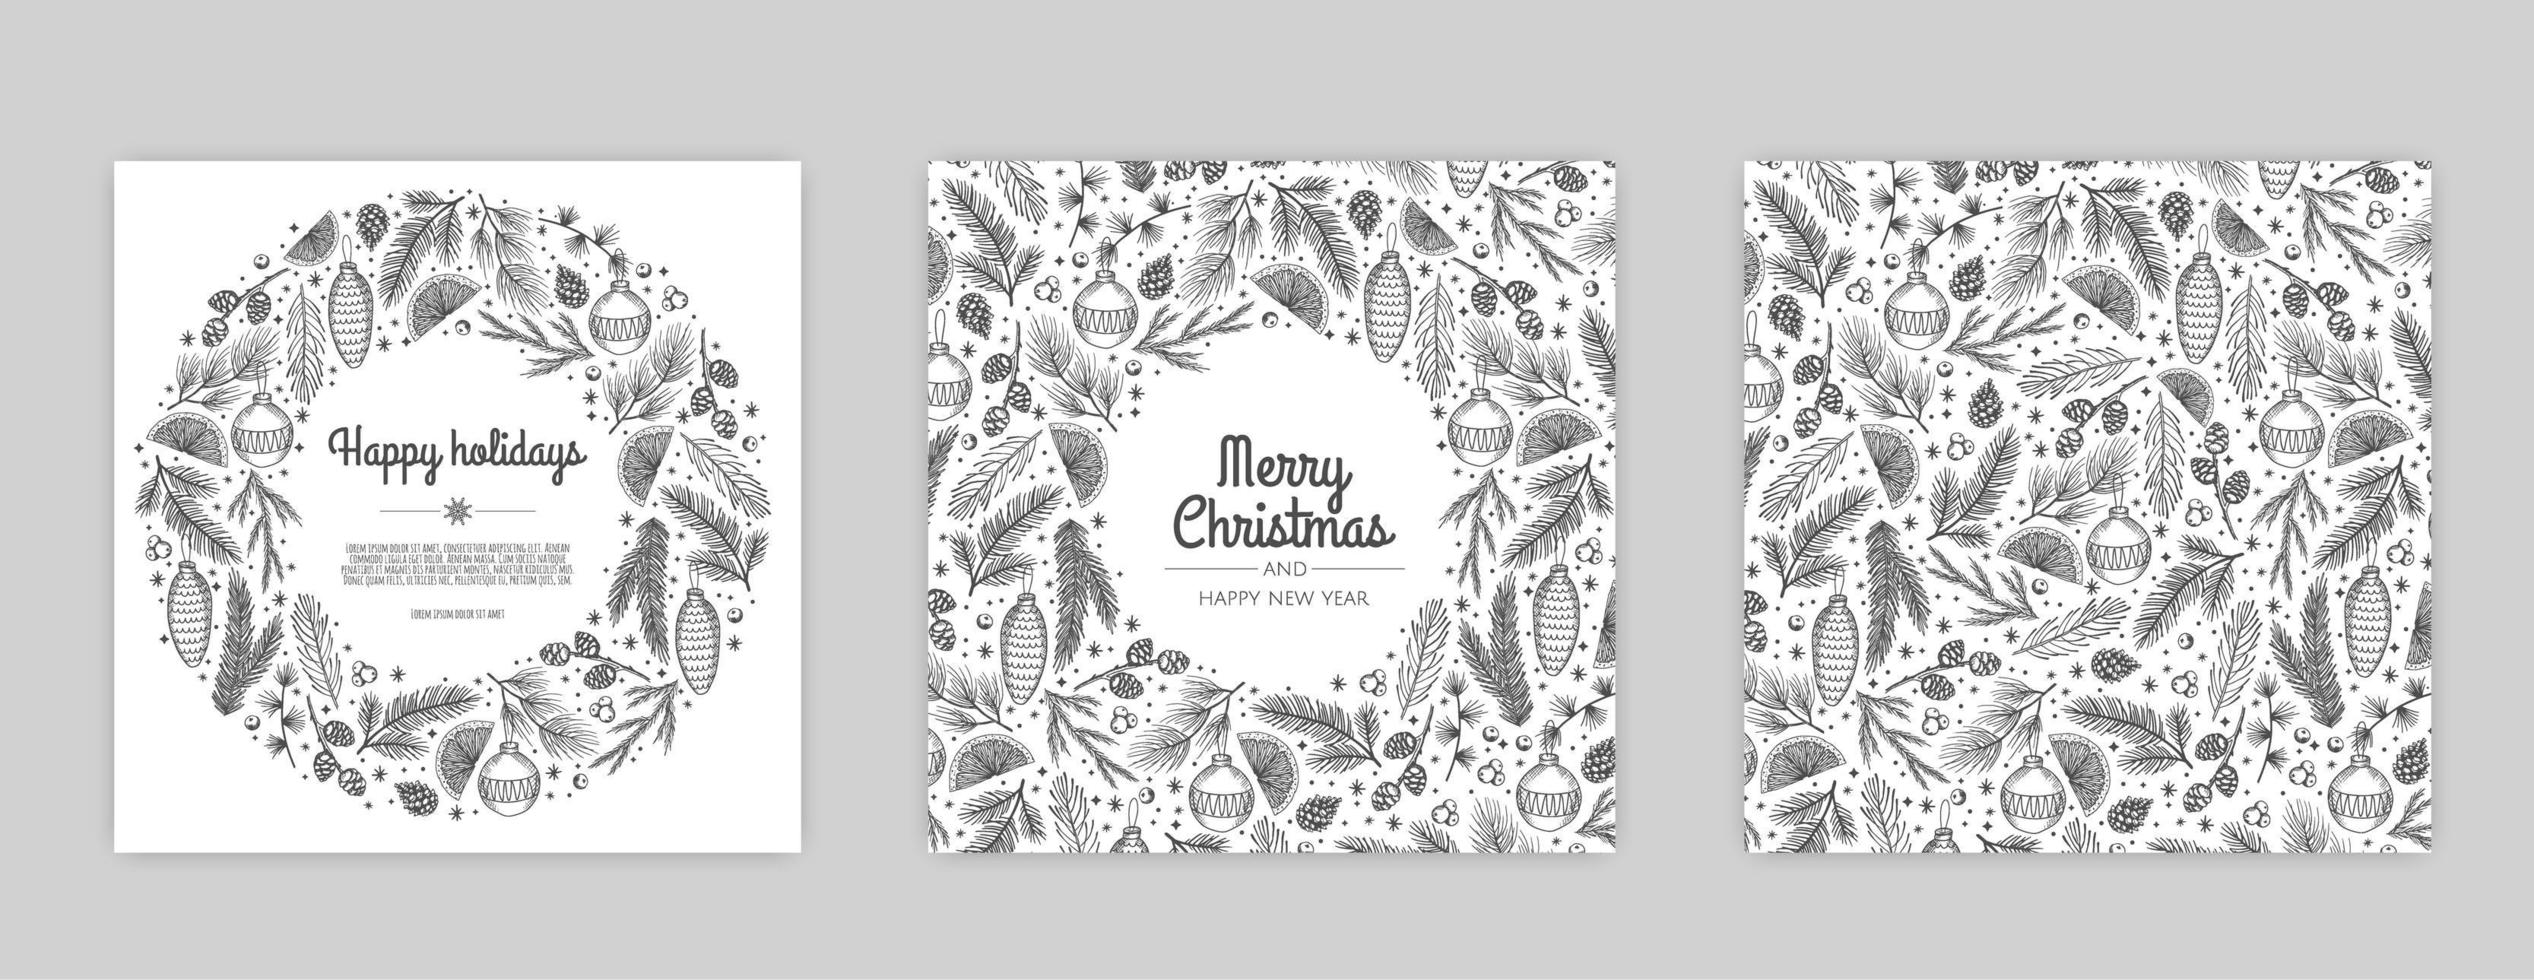 Merry Christmas and Happy New Year Set of backgrounds, greeting cards, posters, holiday covers. vector